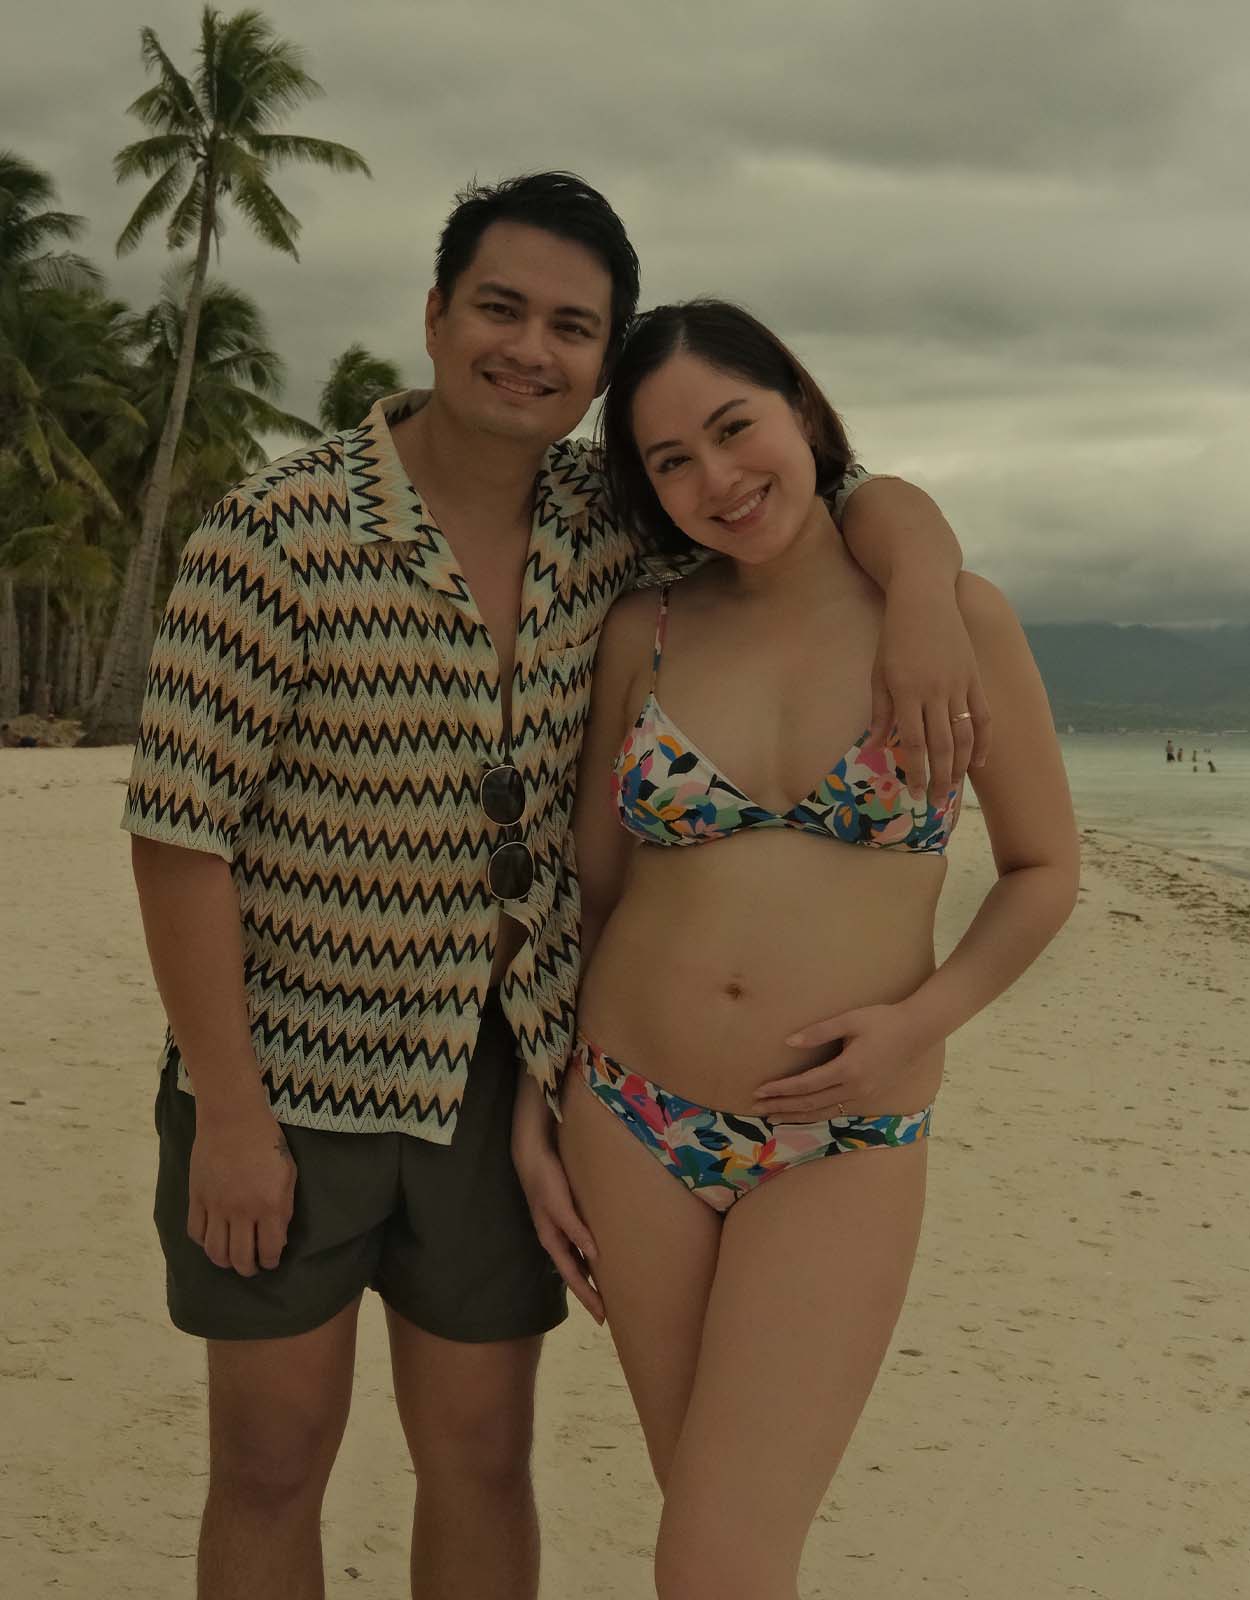 soon-to-be parents Carla Lizardo and Jutt Sulit 